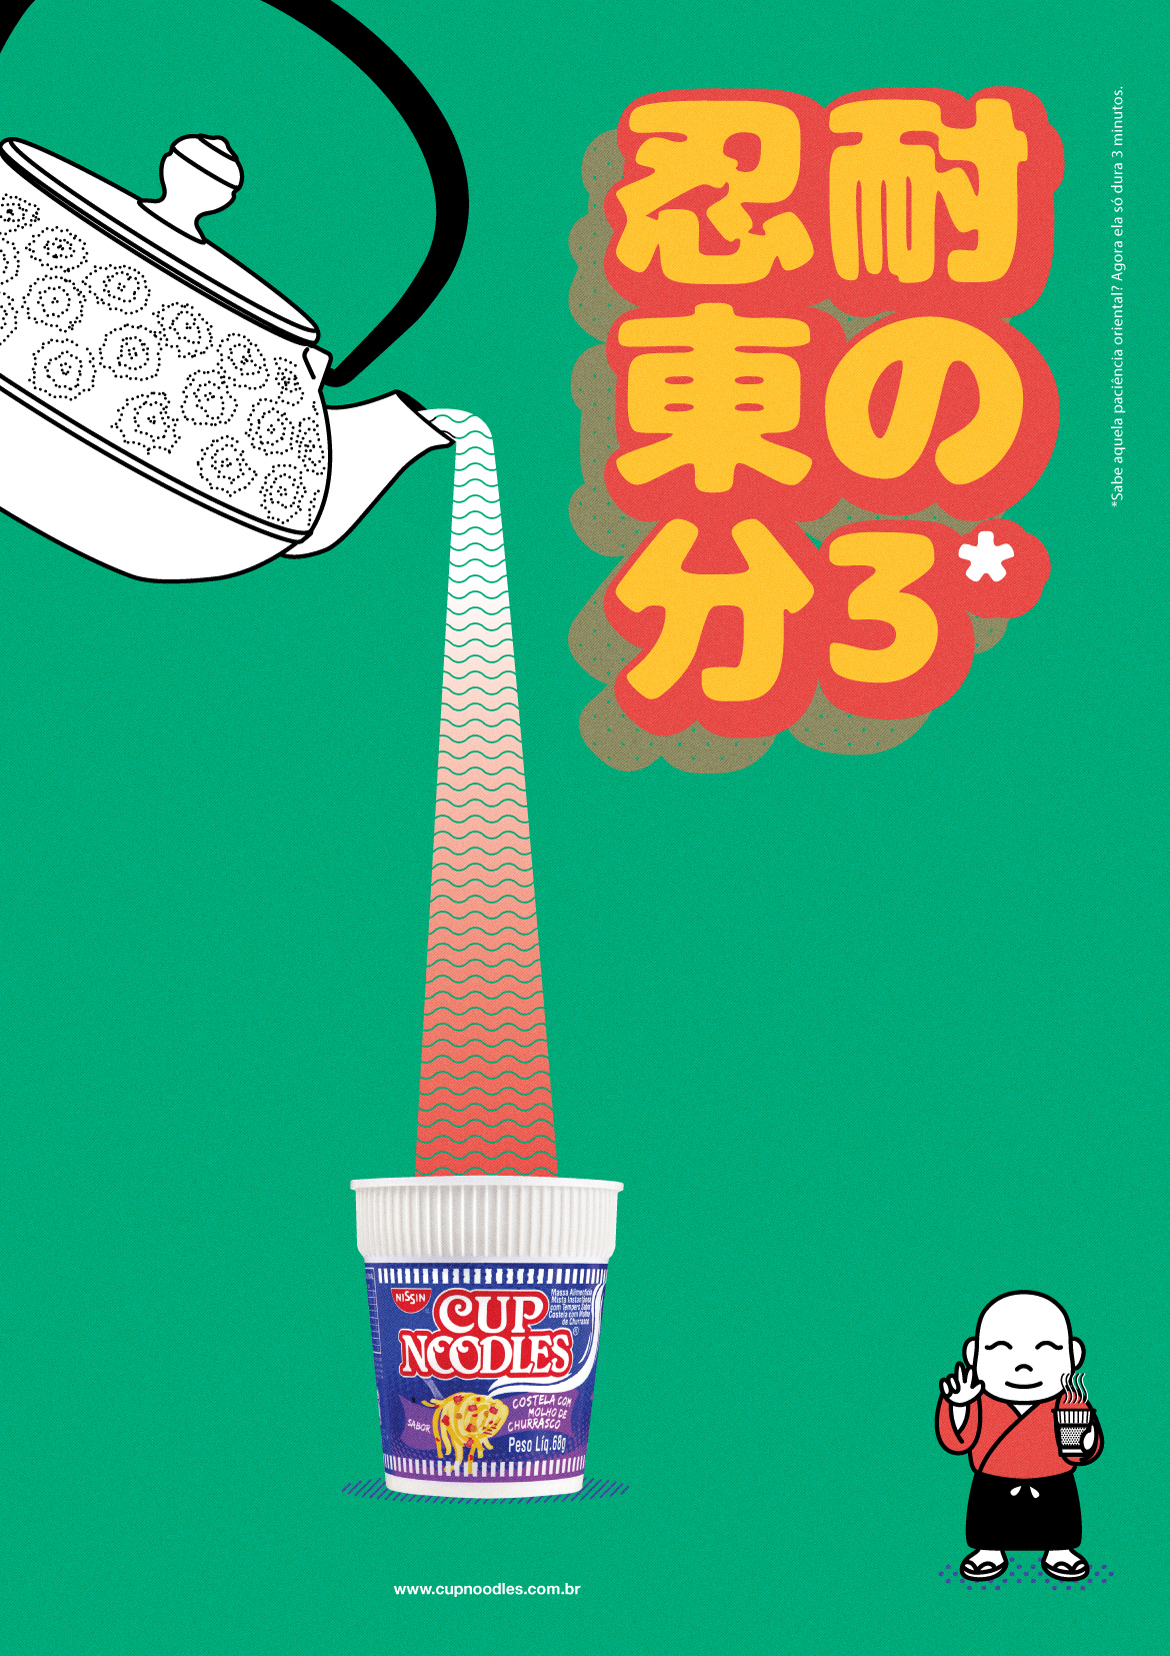 creative product CUP NOODLES copywrting